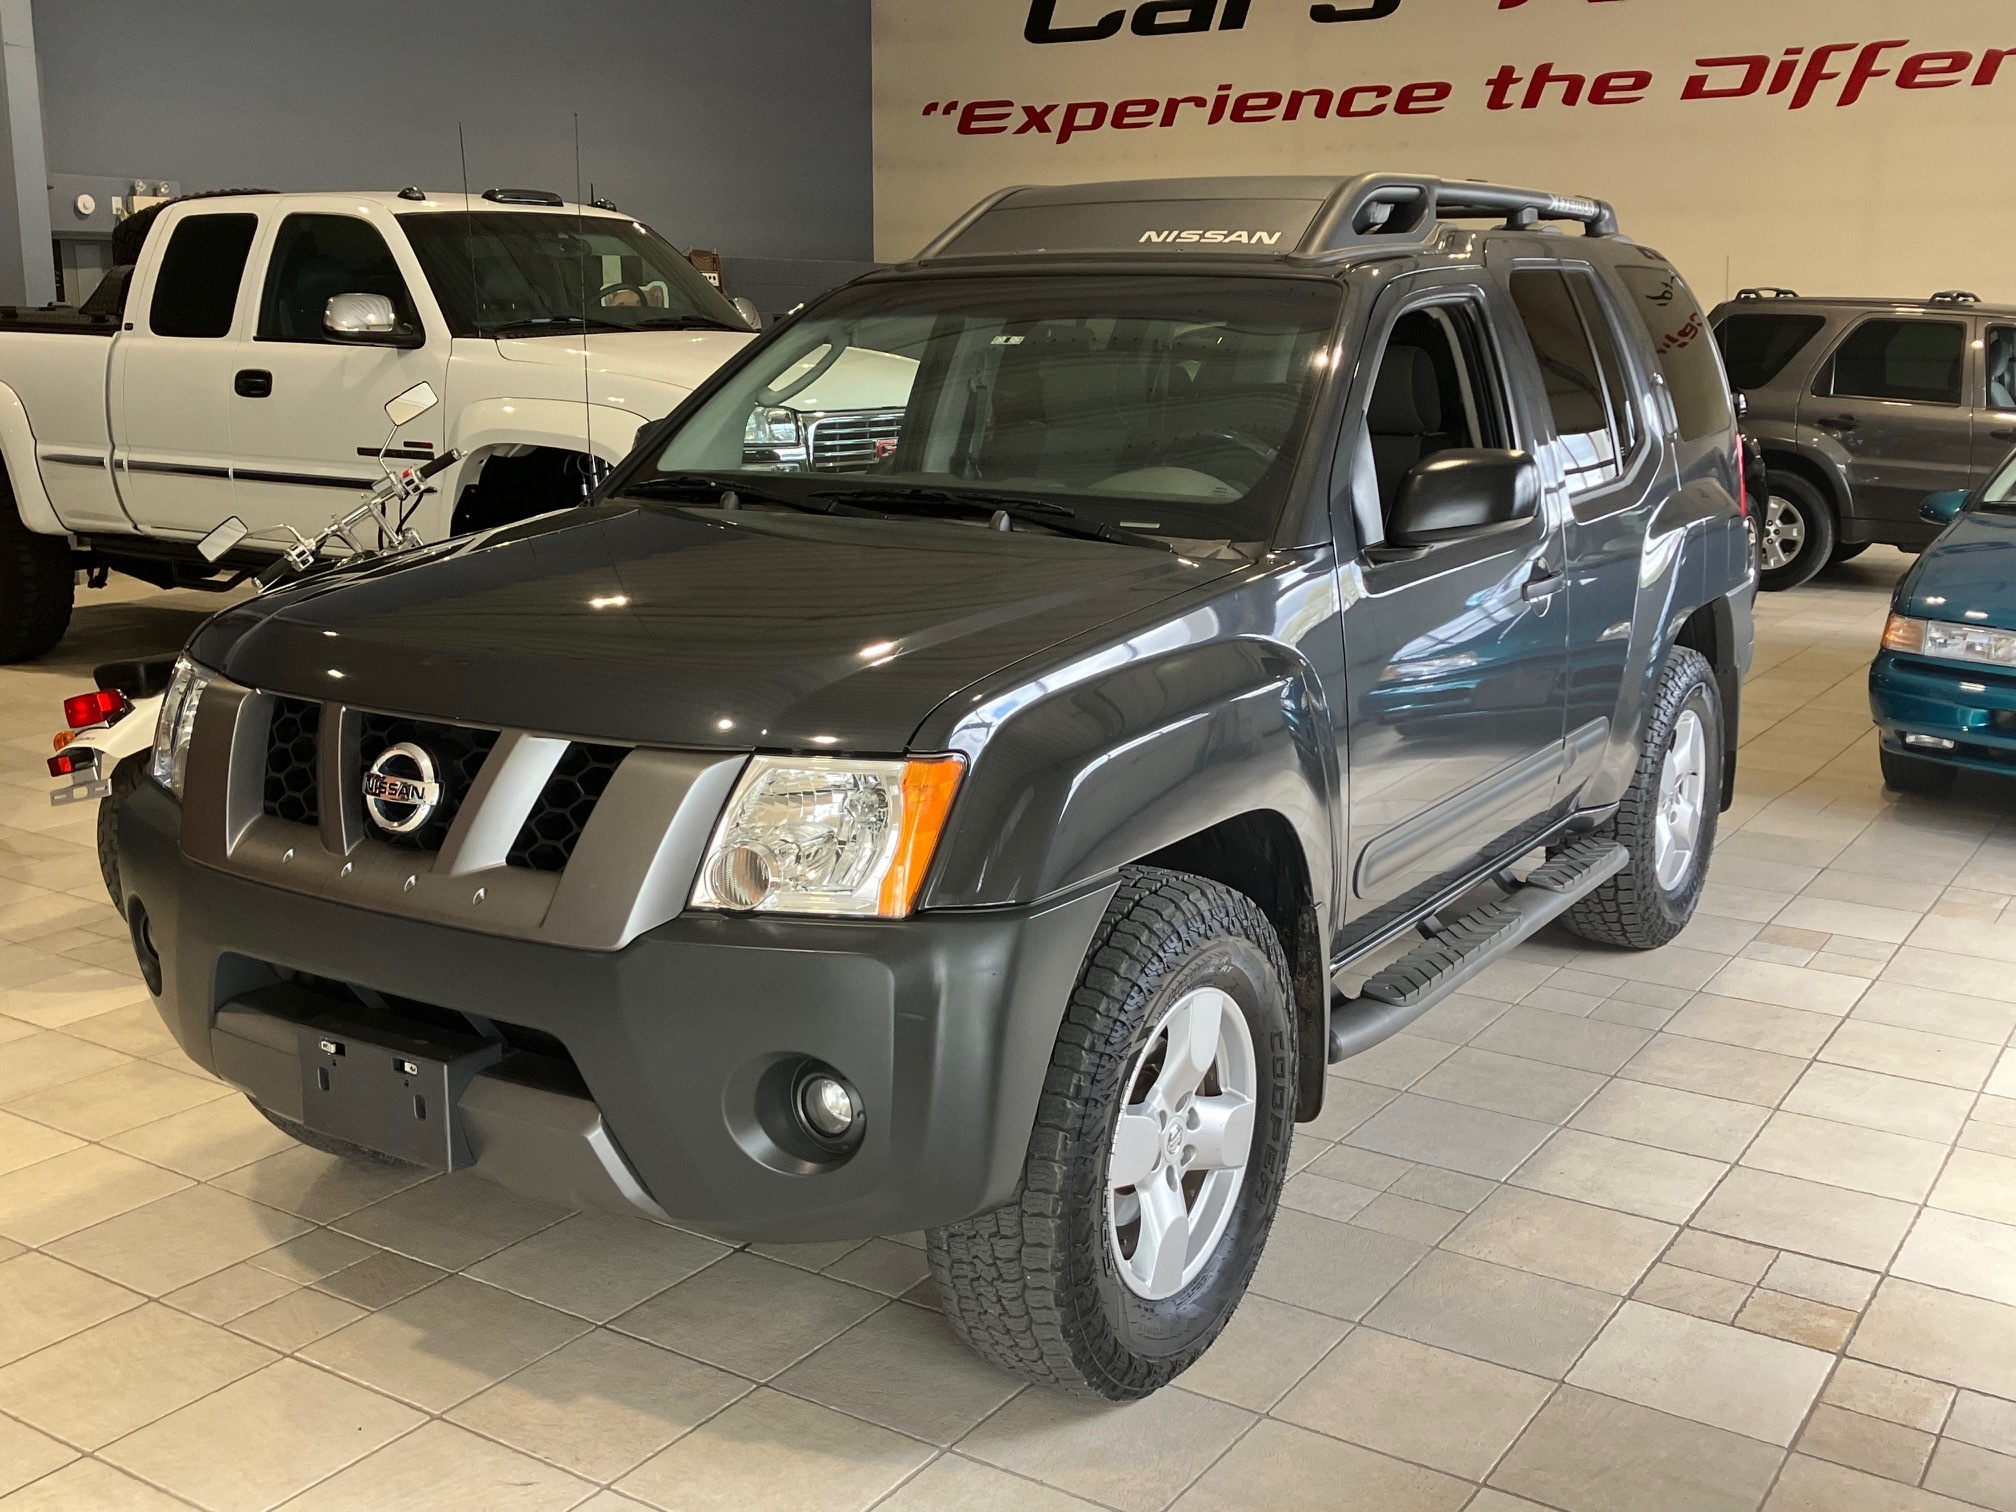 2005 Nissan Xterra 4dr S 4WD V6 Auto CLOTH LOADED ONLY 124K!